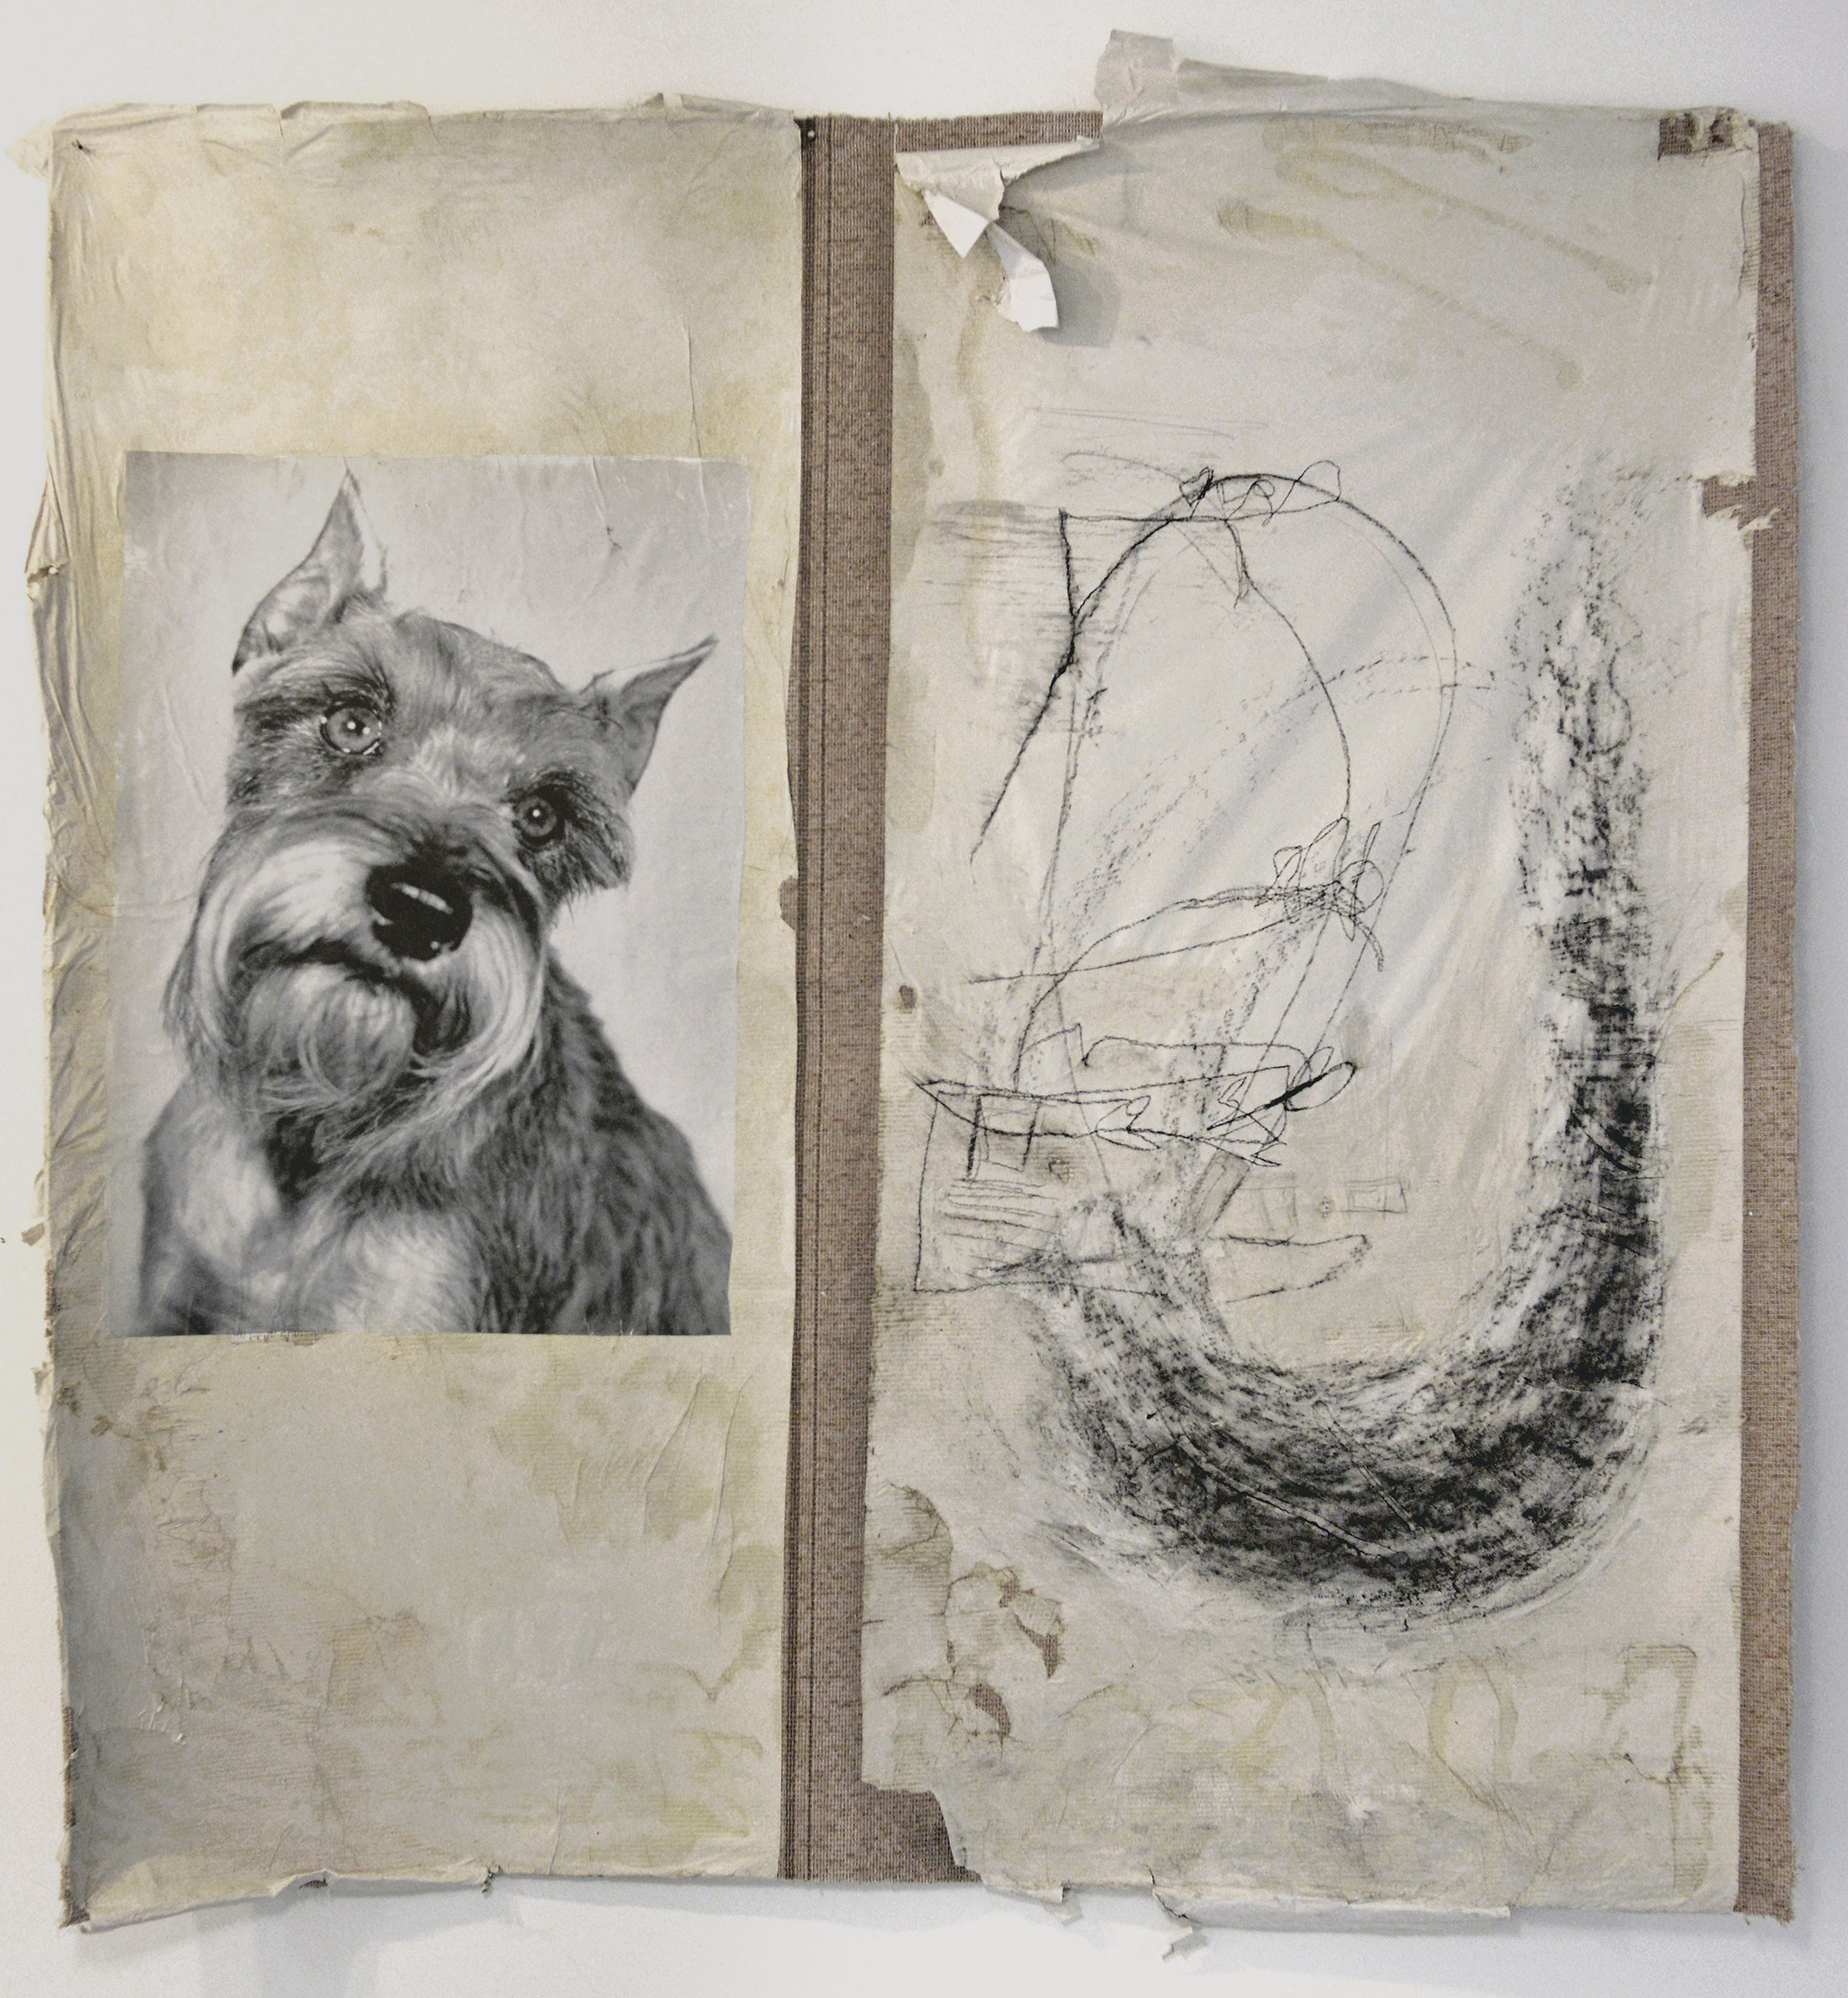    Idiotic and Profound: The Schnauzer     reproduced image, charcoal, and paper on carpet    90” x 70”     